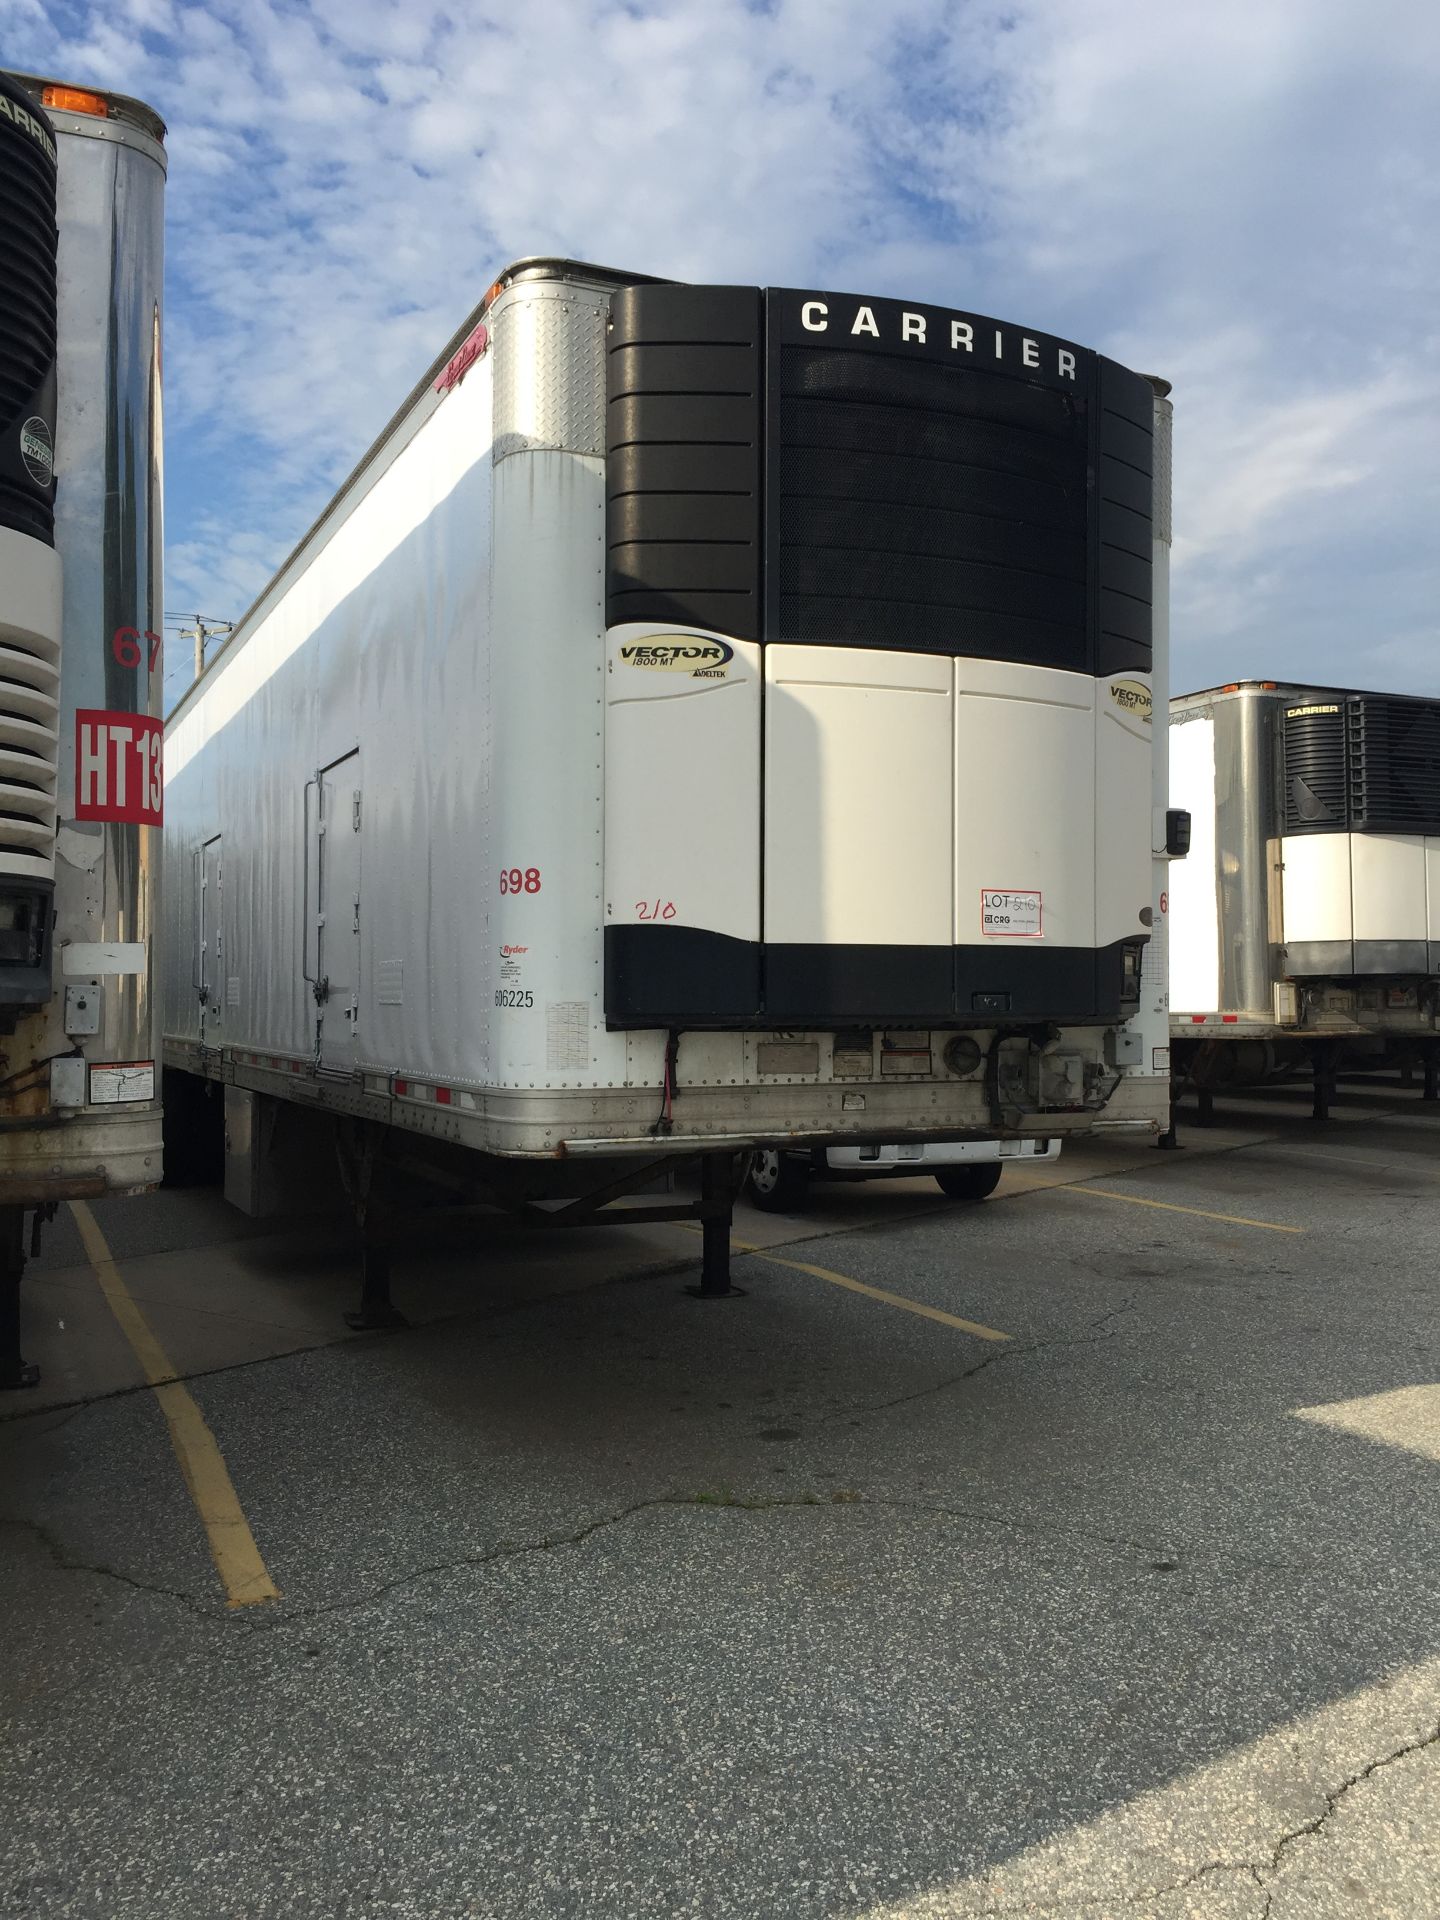 2009 Great Dane Multi Temp Refrigerated Semi Trailer - 45 Long, 102" wide, Carrier Vector 1800MT - Image 8 of 10